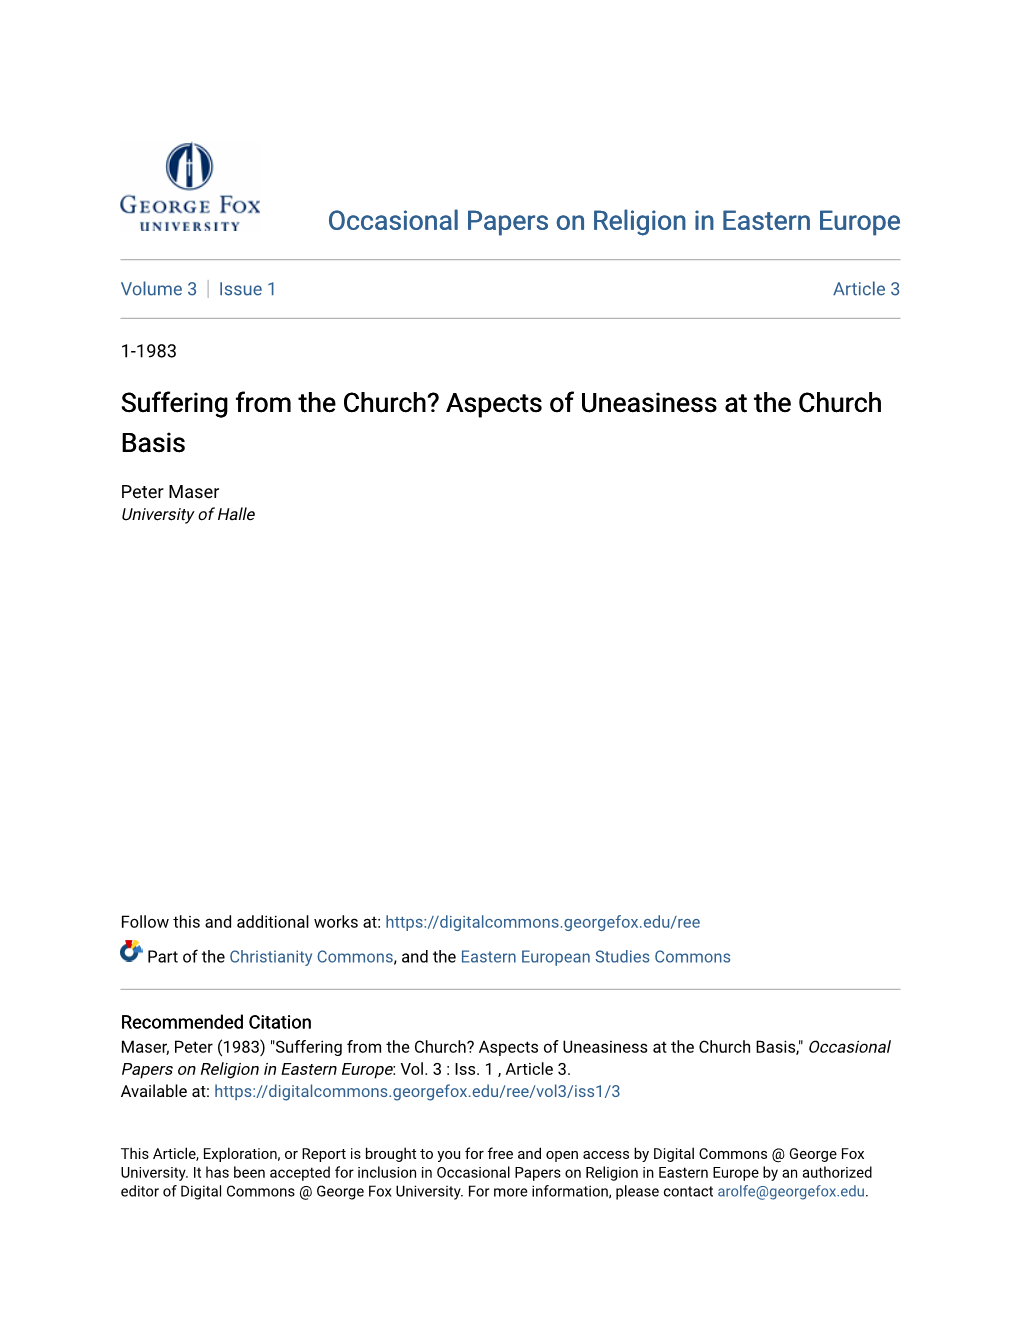 Suffering from the Church? Aspects of Uneasiness at the Church Basis